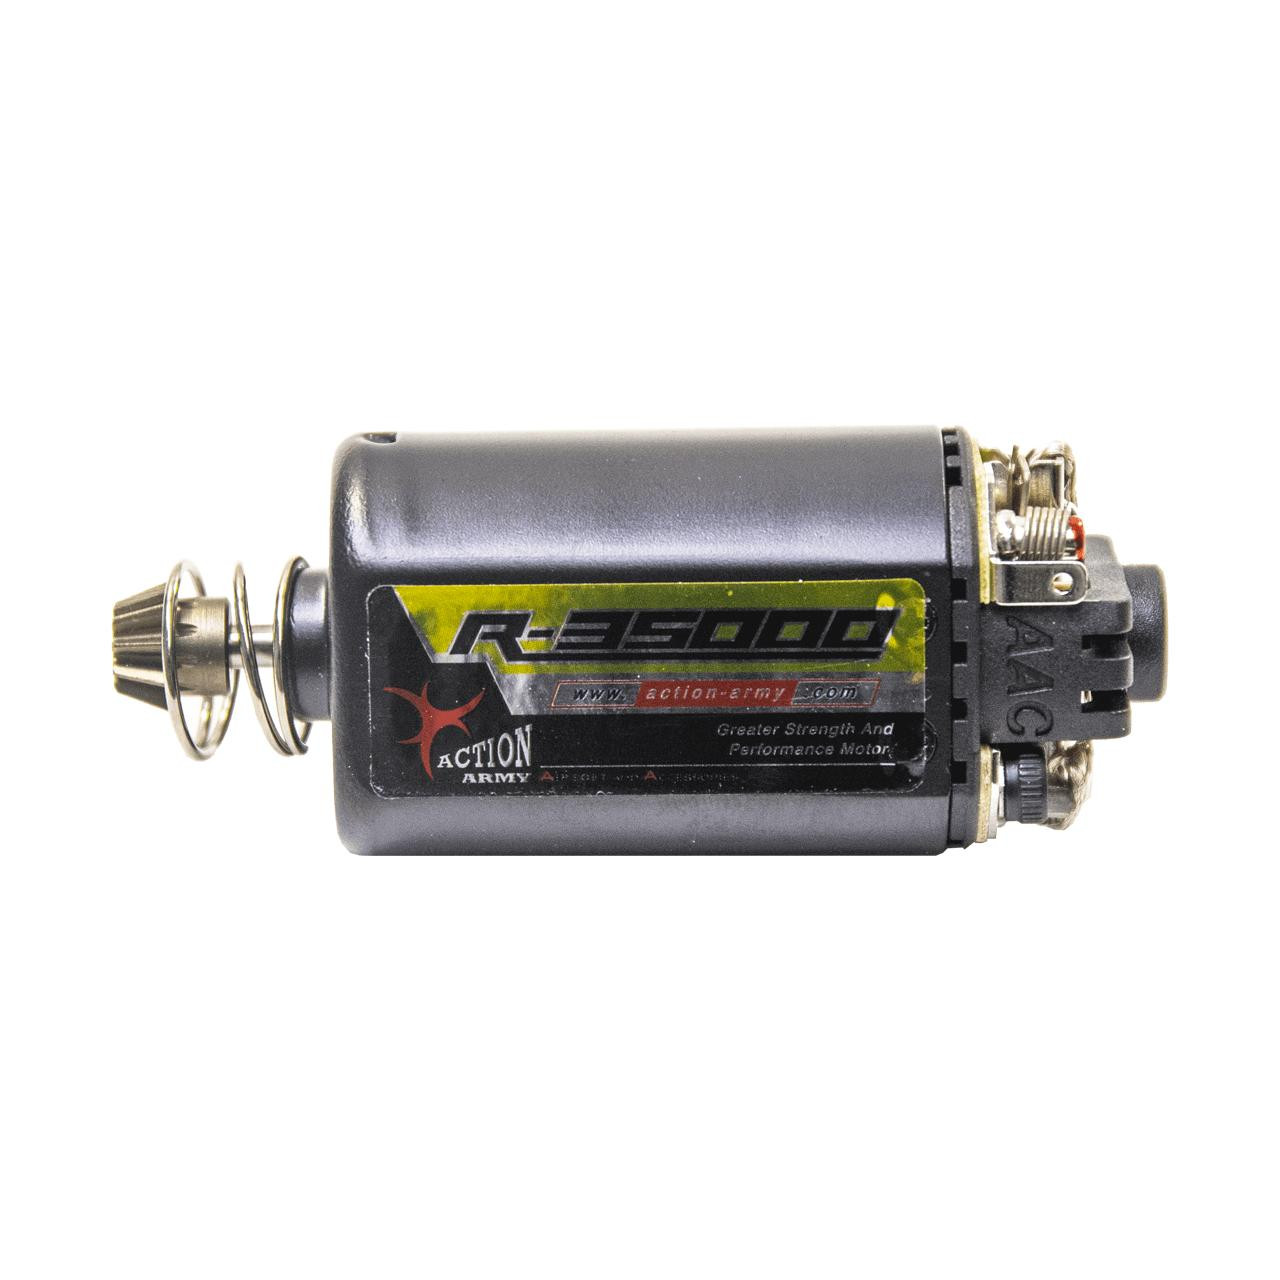  Action Army Infinity Short Axis Motor | R30000 - R40000 